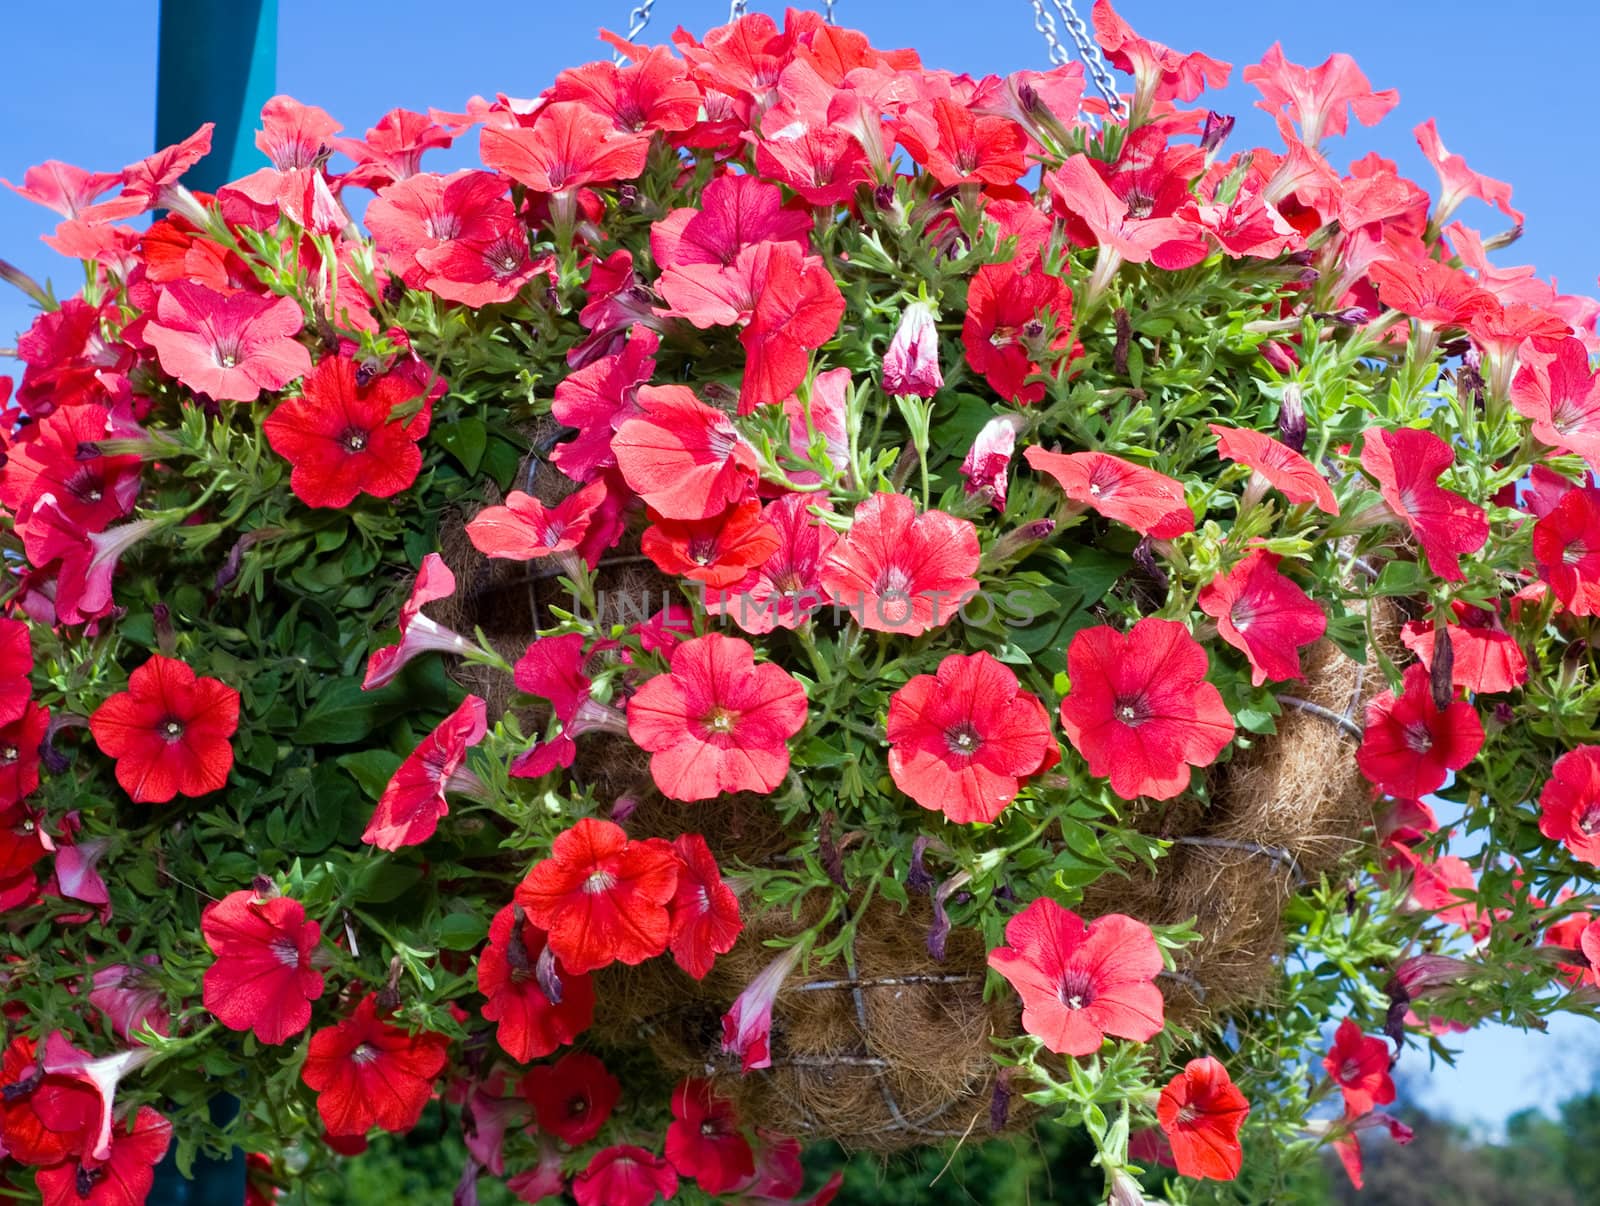 A basket of red flowers shot during the day